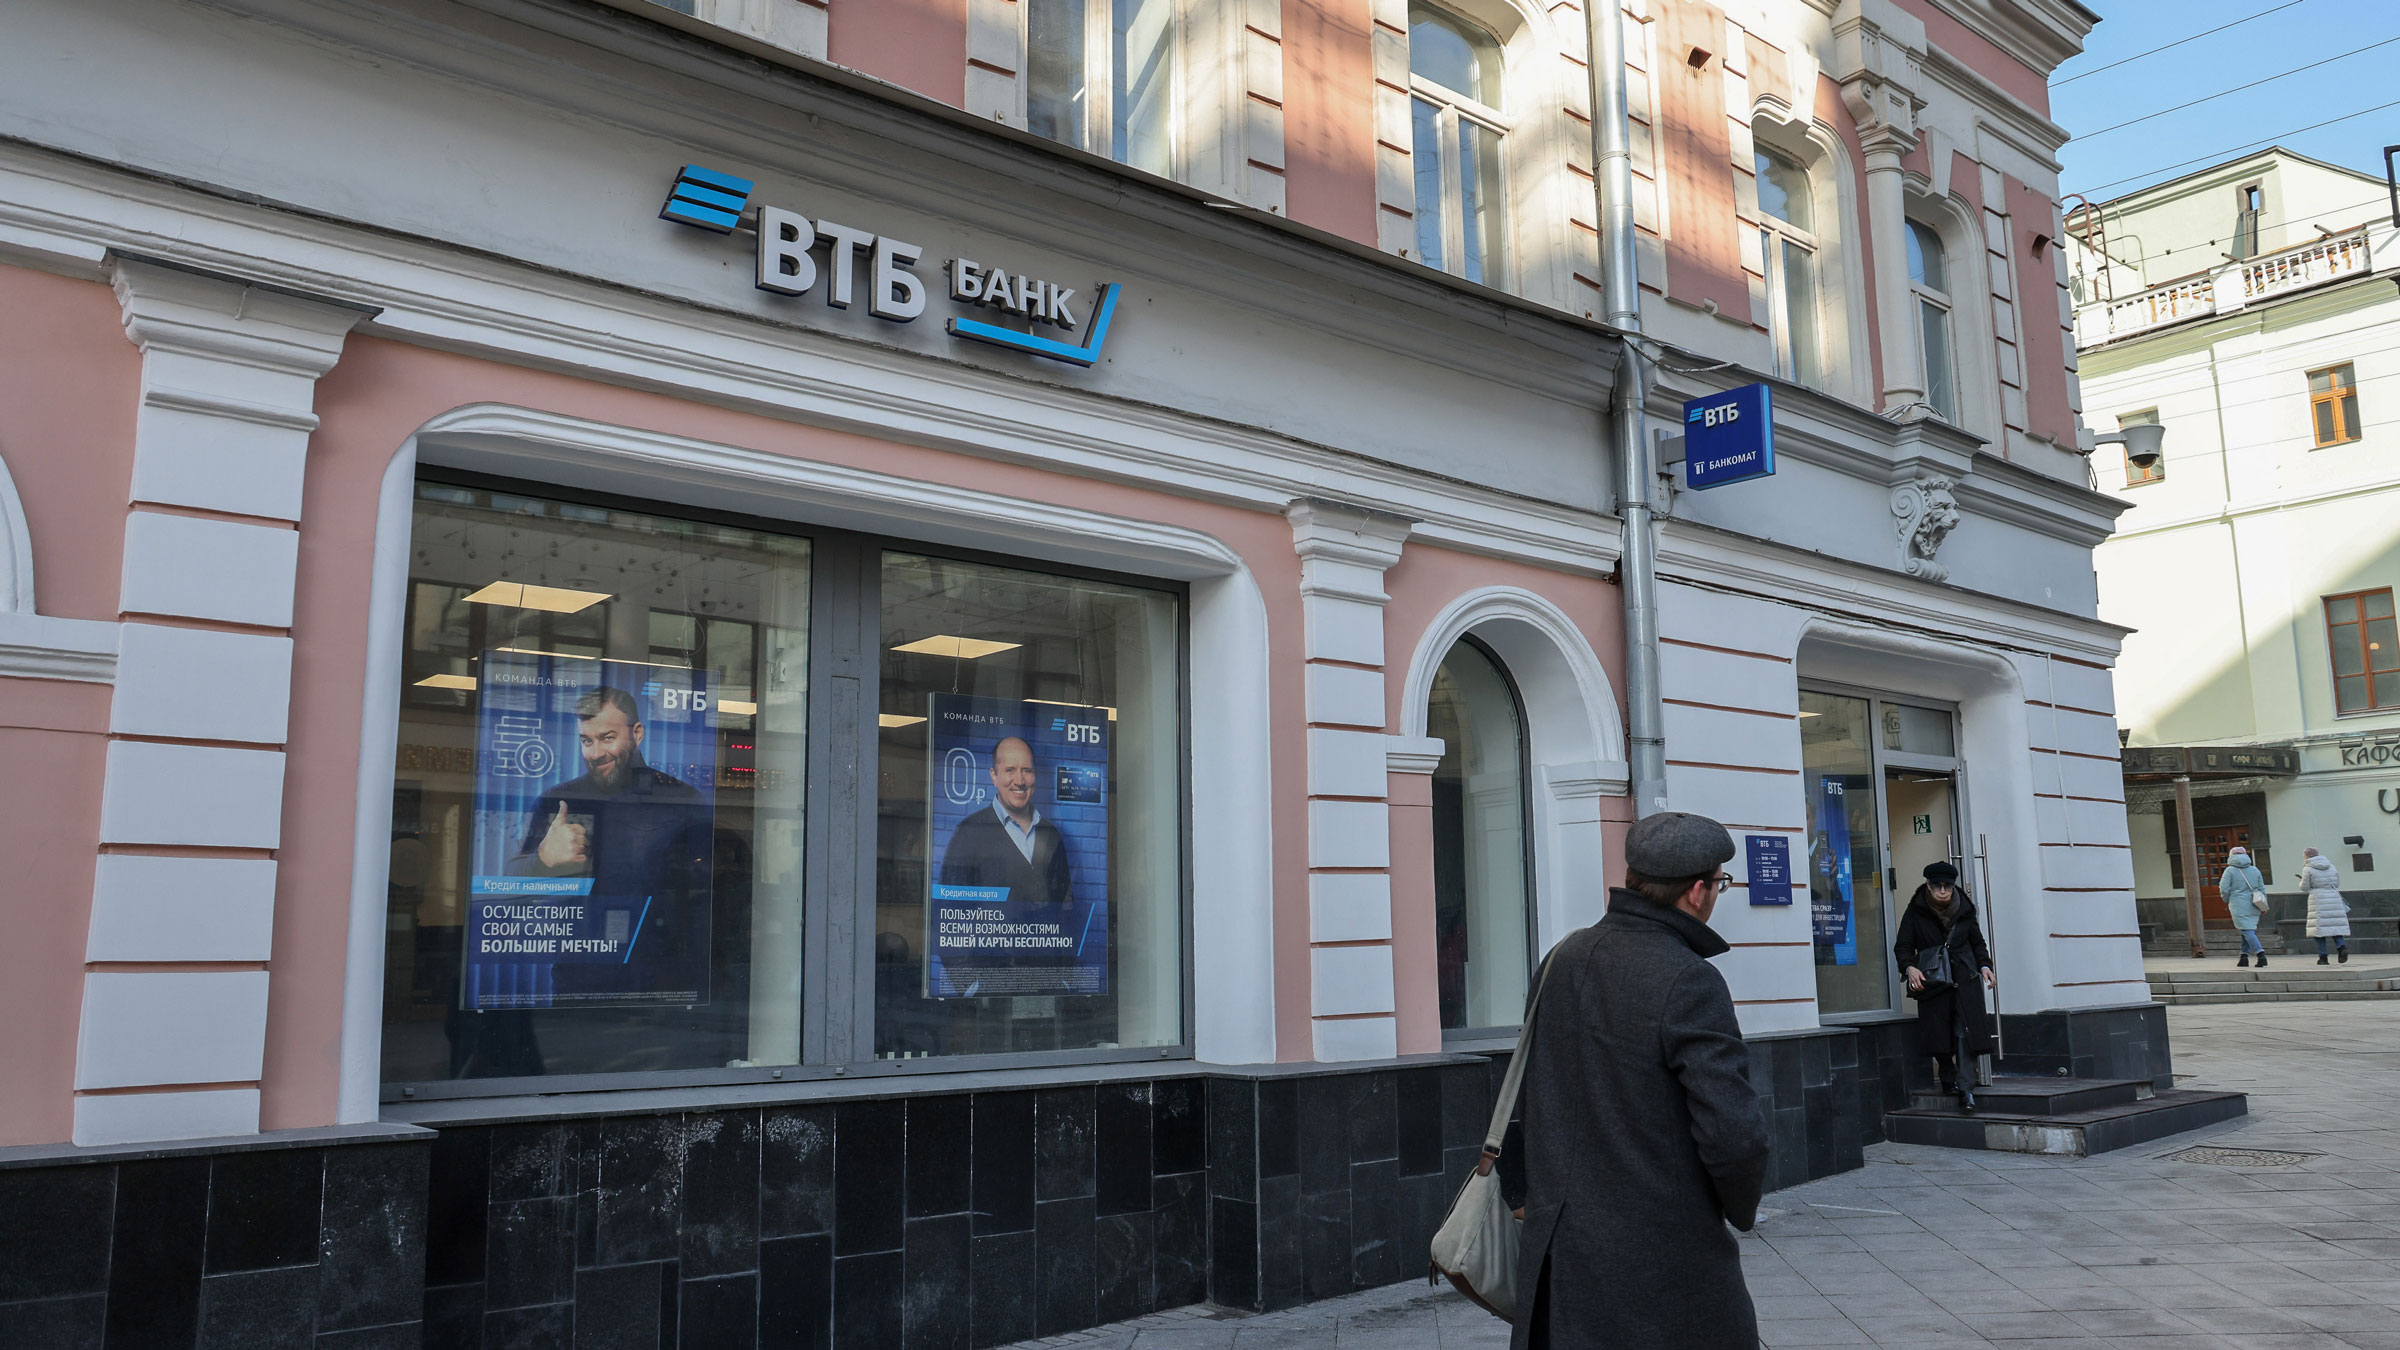 A VTB Bank branch is seen in Moscow on February 28.